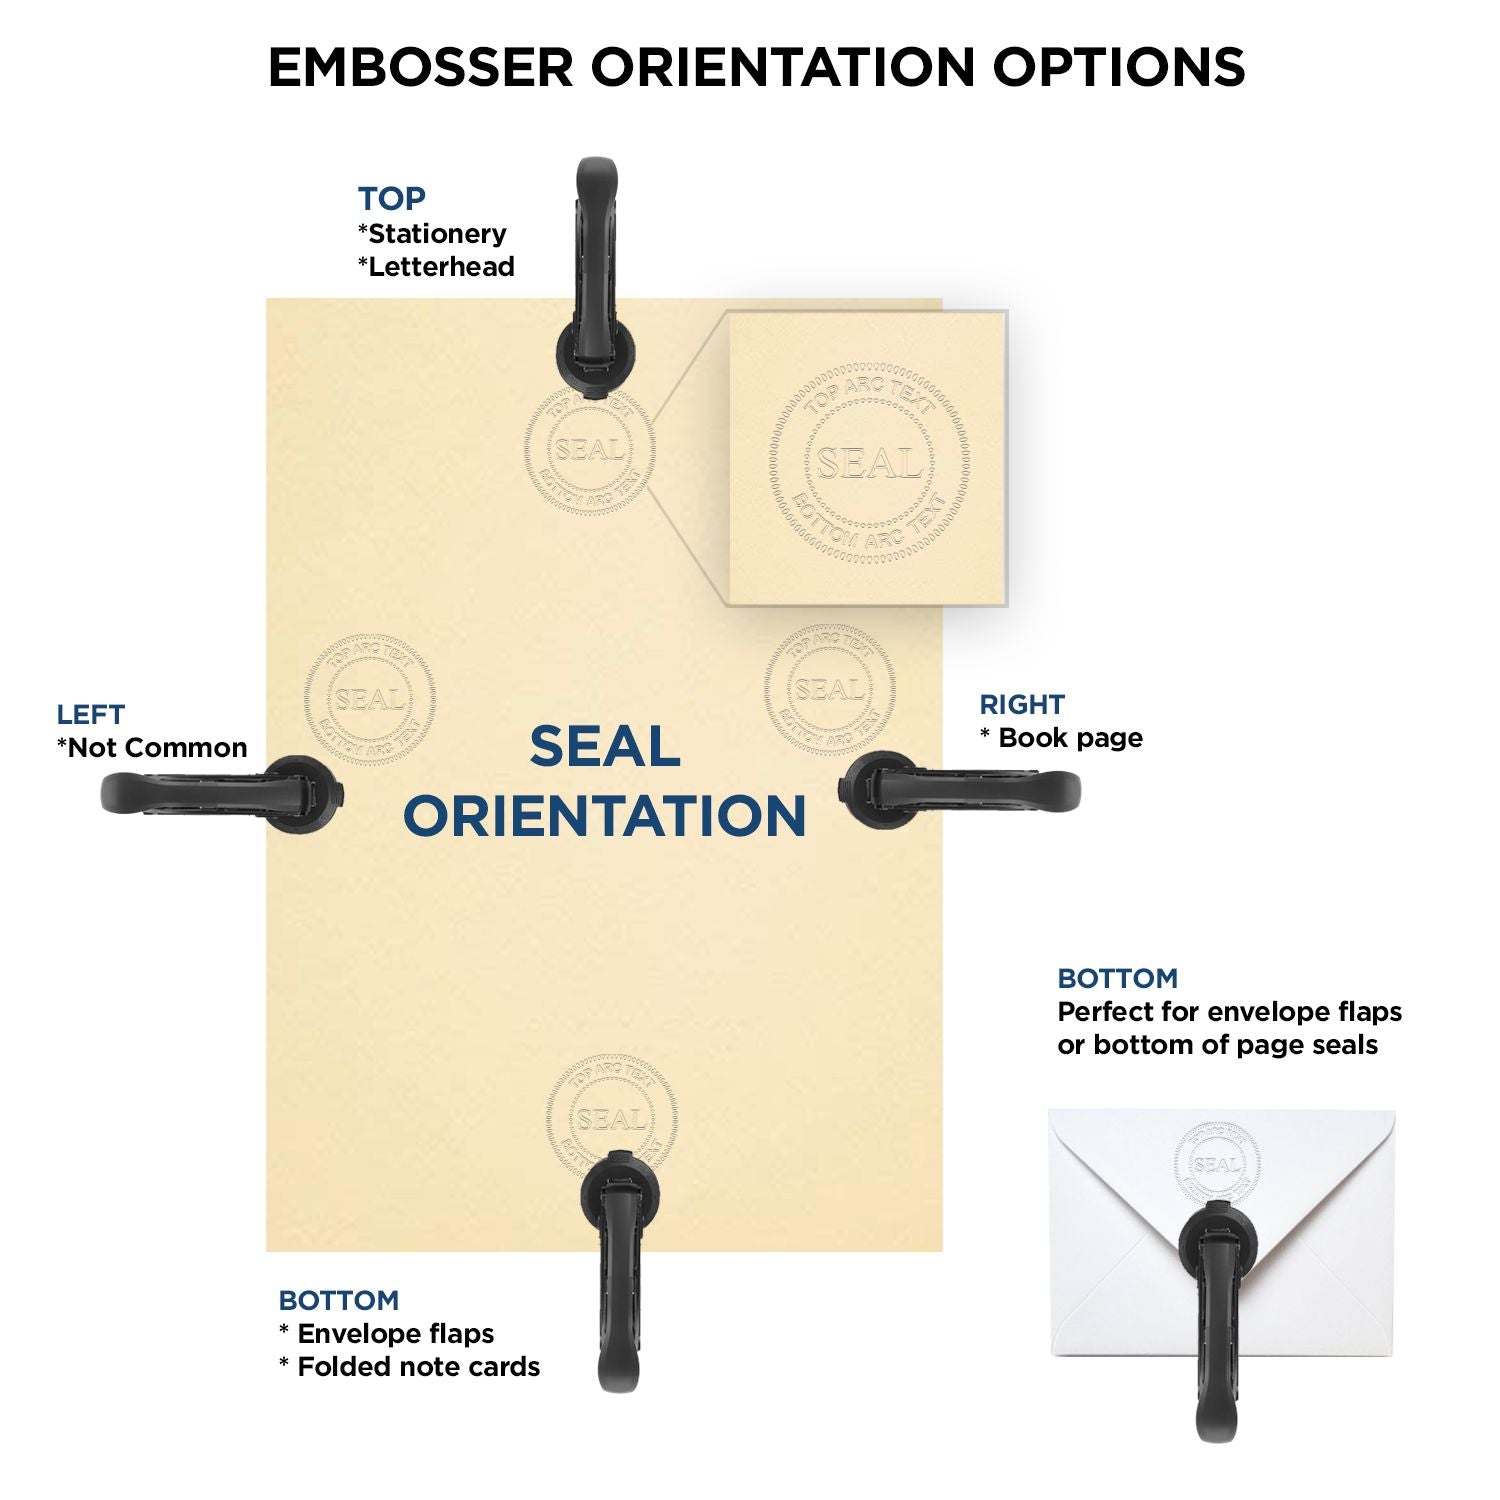 An infographic for the Heavy Duty Cast Iron Arkansas Architect Embosser showing embosser orientation, this is showing examples of a top, bottom, right and left insert.